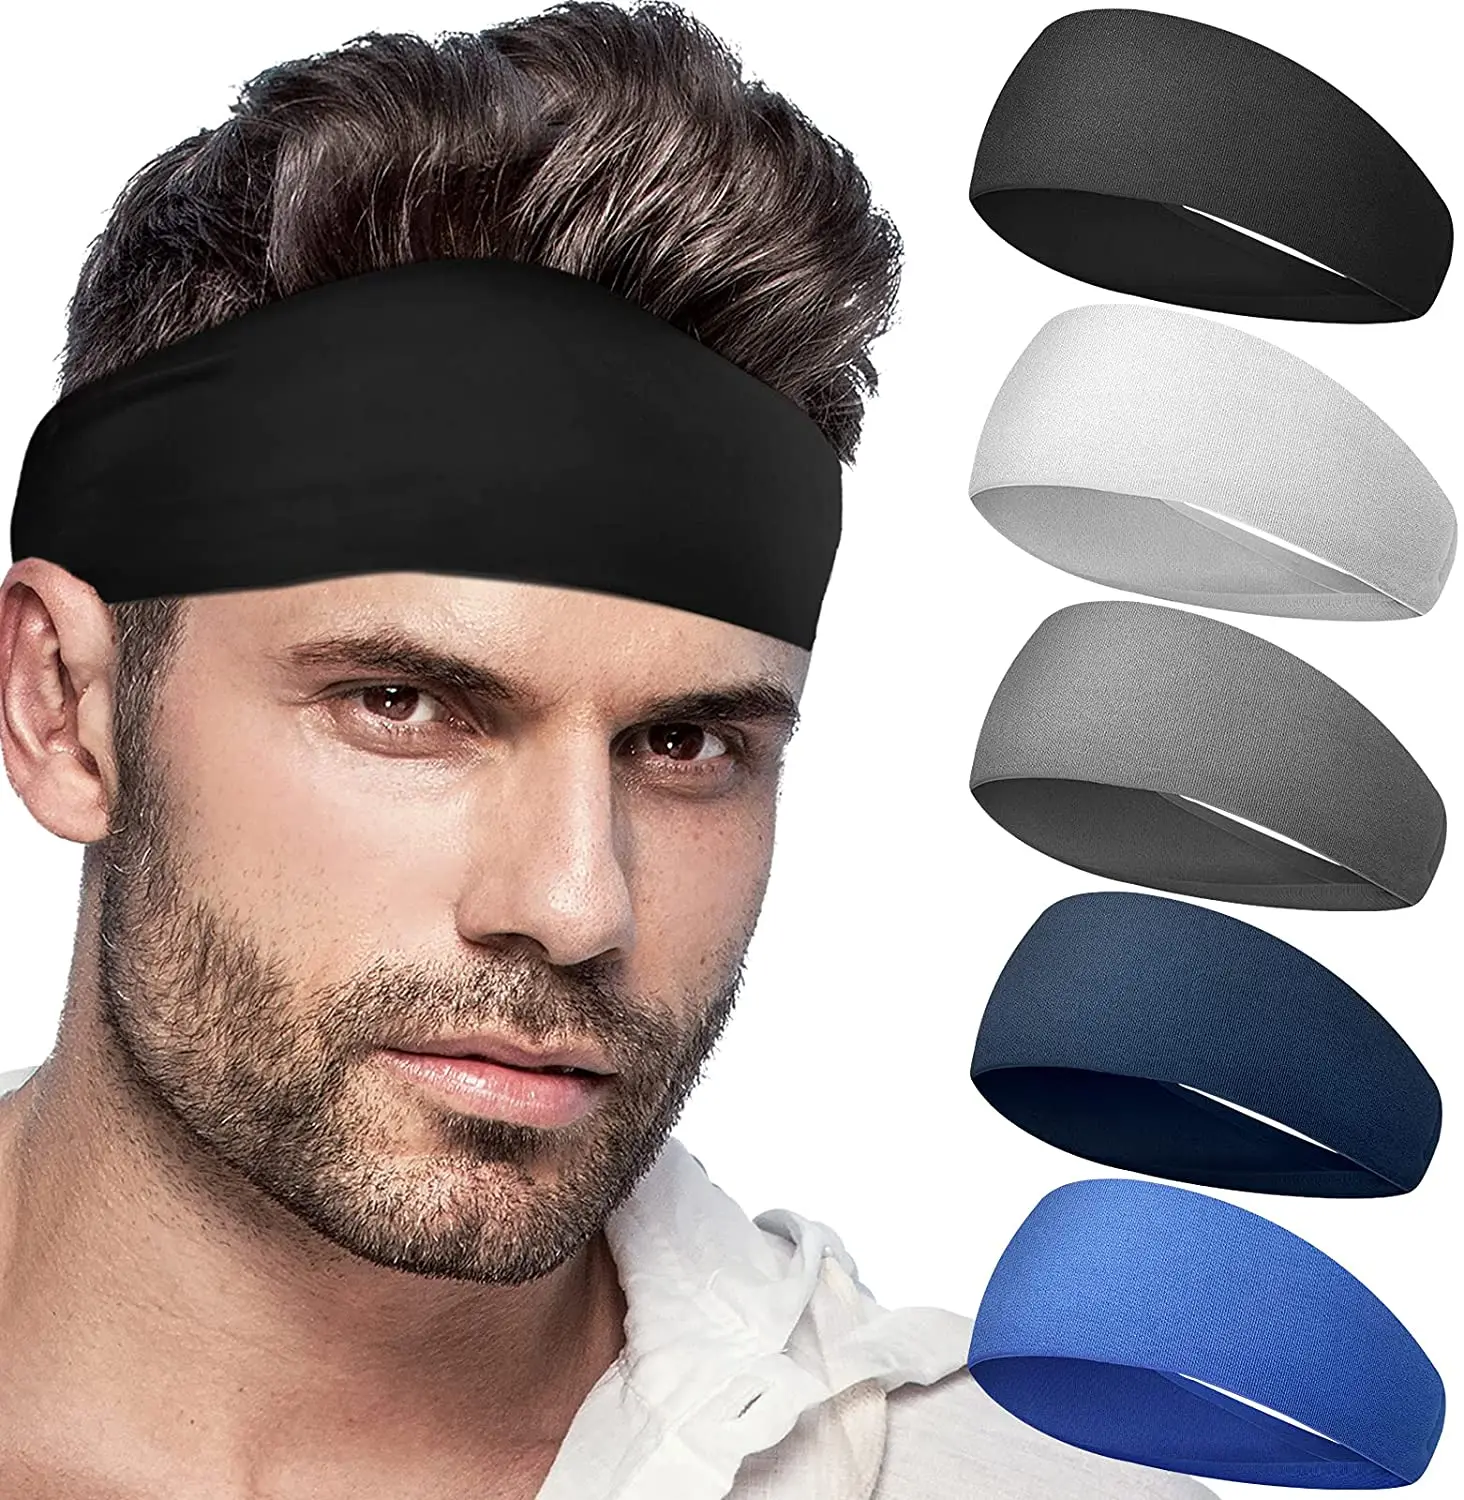 Onlytrends Sporty Head Bands Nonslip Sweat Headband For Men,Moisture  Wicking Men Headbands For Long Hair,Sweat Bands - Buy Sporty Head Bands,Hair  Bands For Men,Hair Accessories Product on 